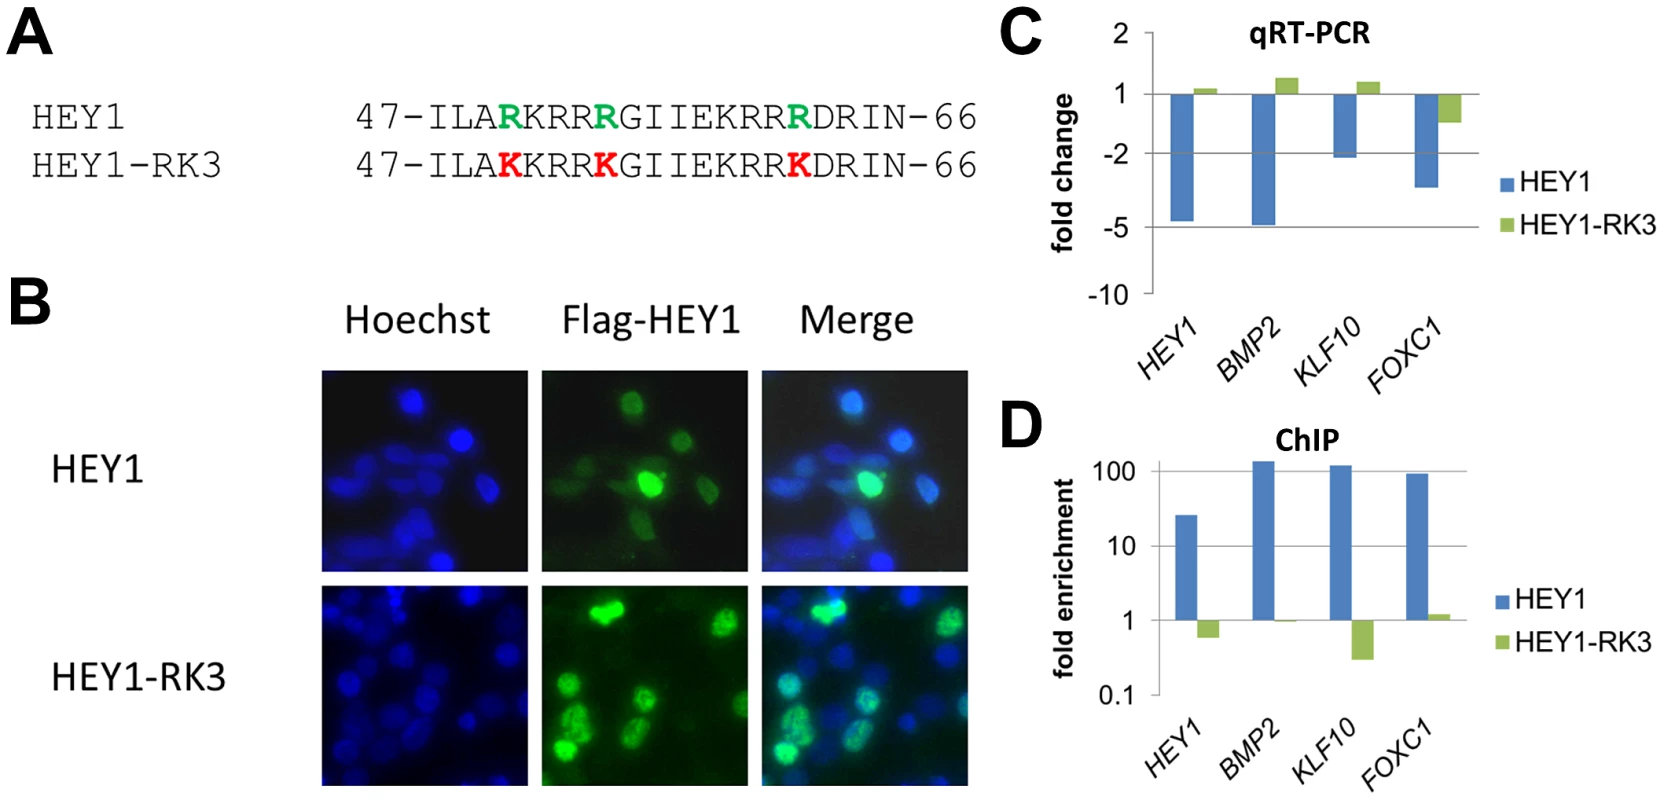 Mutation of putative DNA contacting amino acids in the HEY1 basic domain inactivates its function.